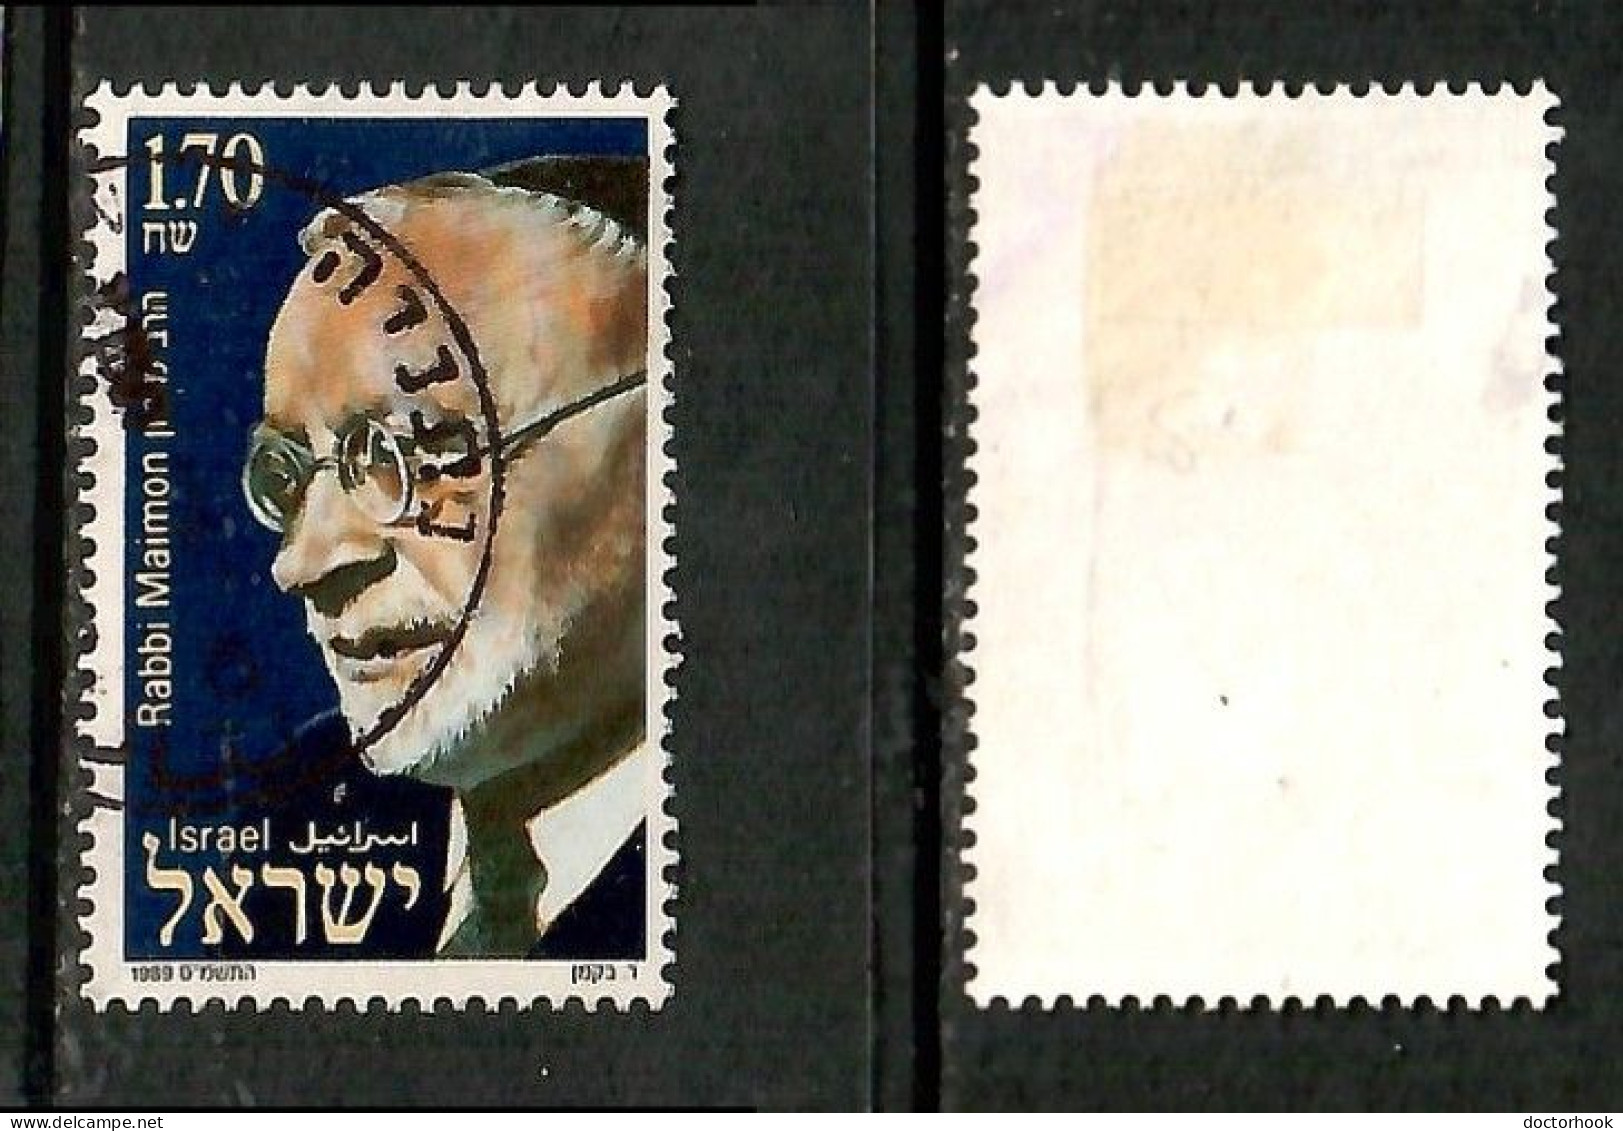 ISRAEL   Scott # 1011 USED (CONDITION PER SCAN) (Stamp Scan # 1026-13) - Usados (sin Tab)